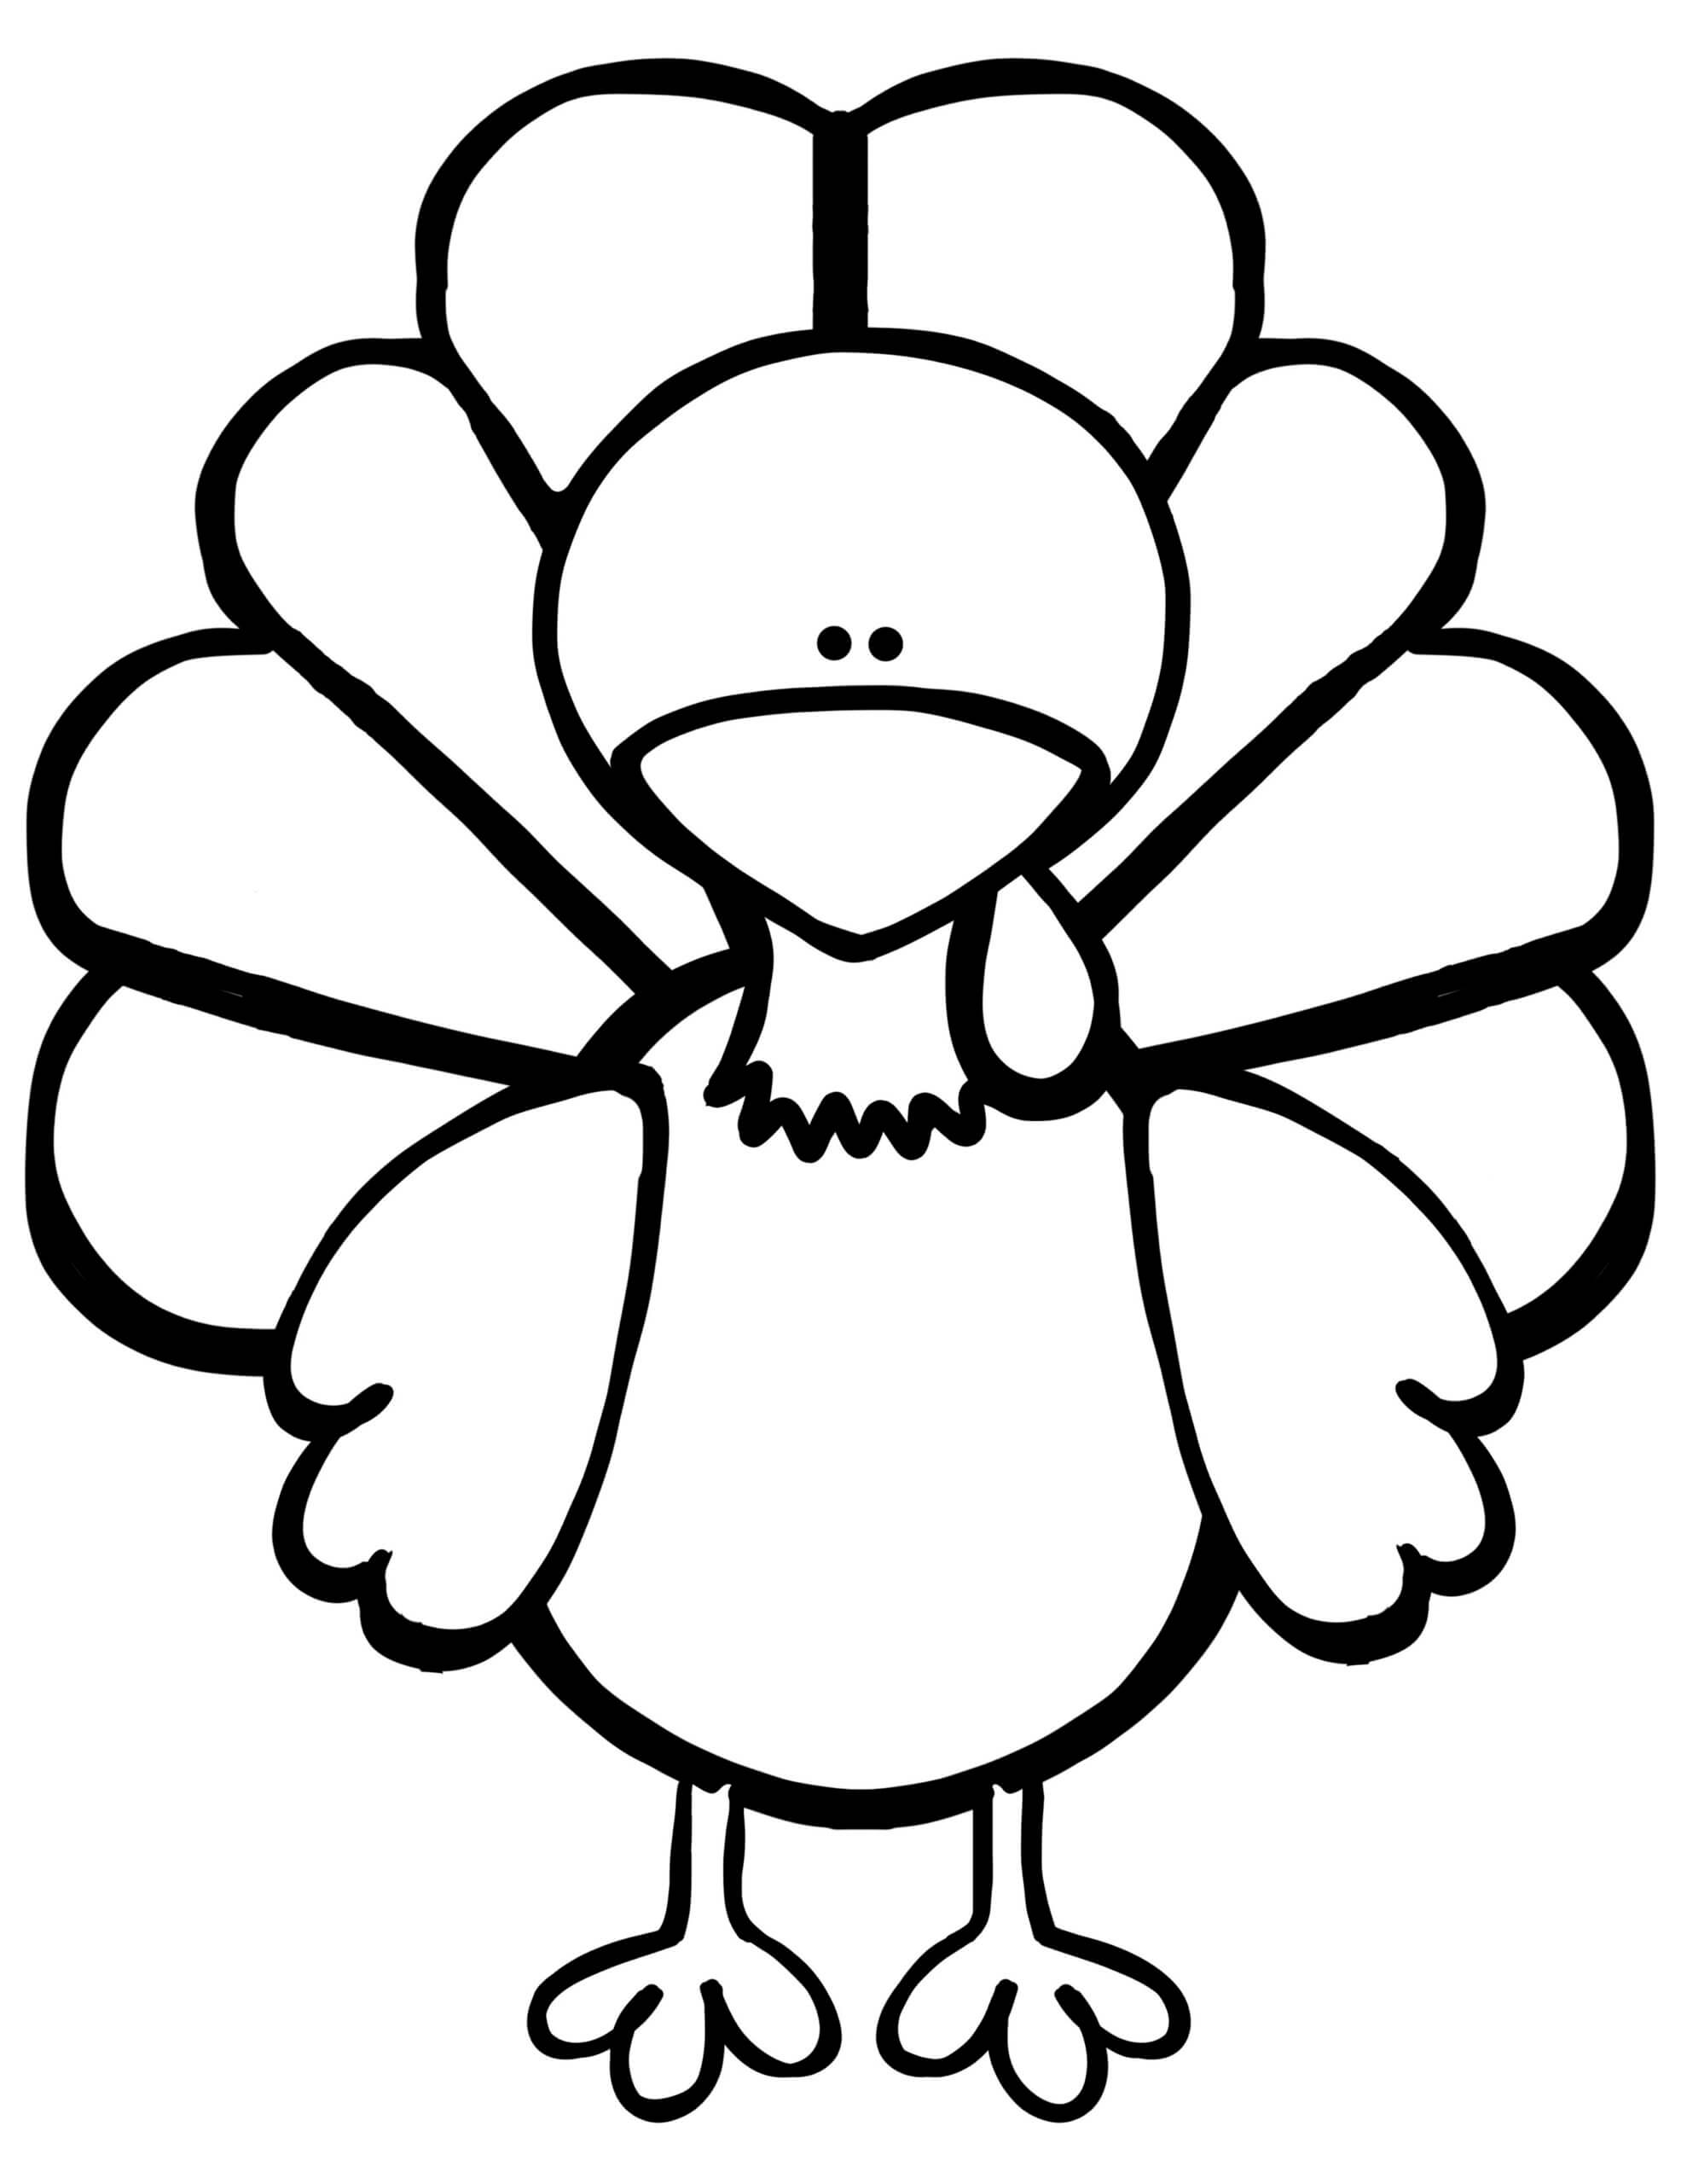 Everything You Need For The Turkey Disguise Project - Kids Regarding Blank Turkey Template